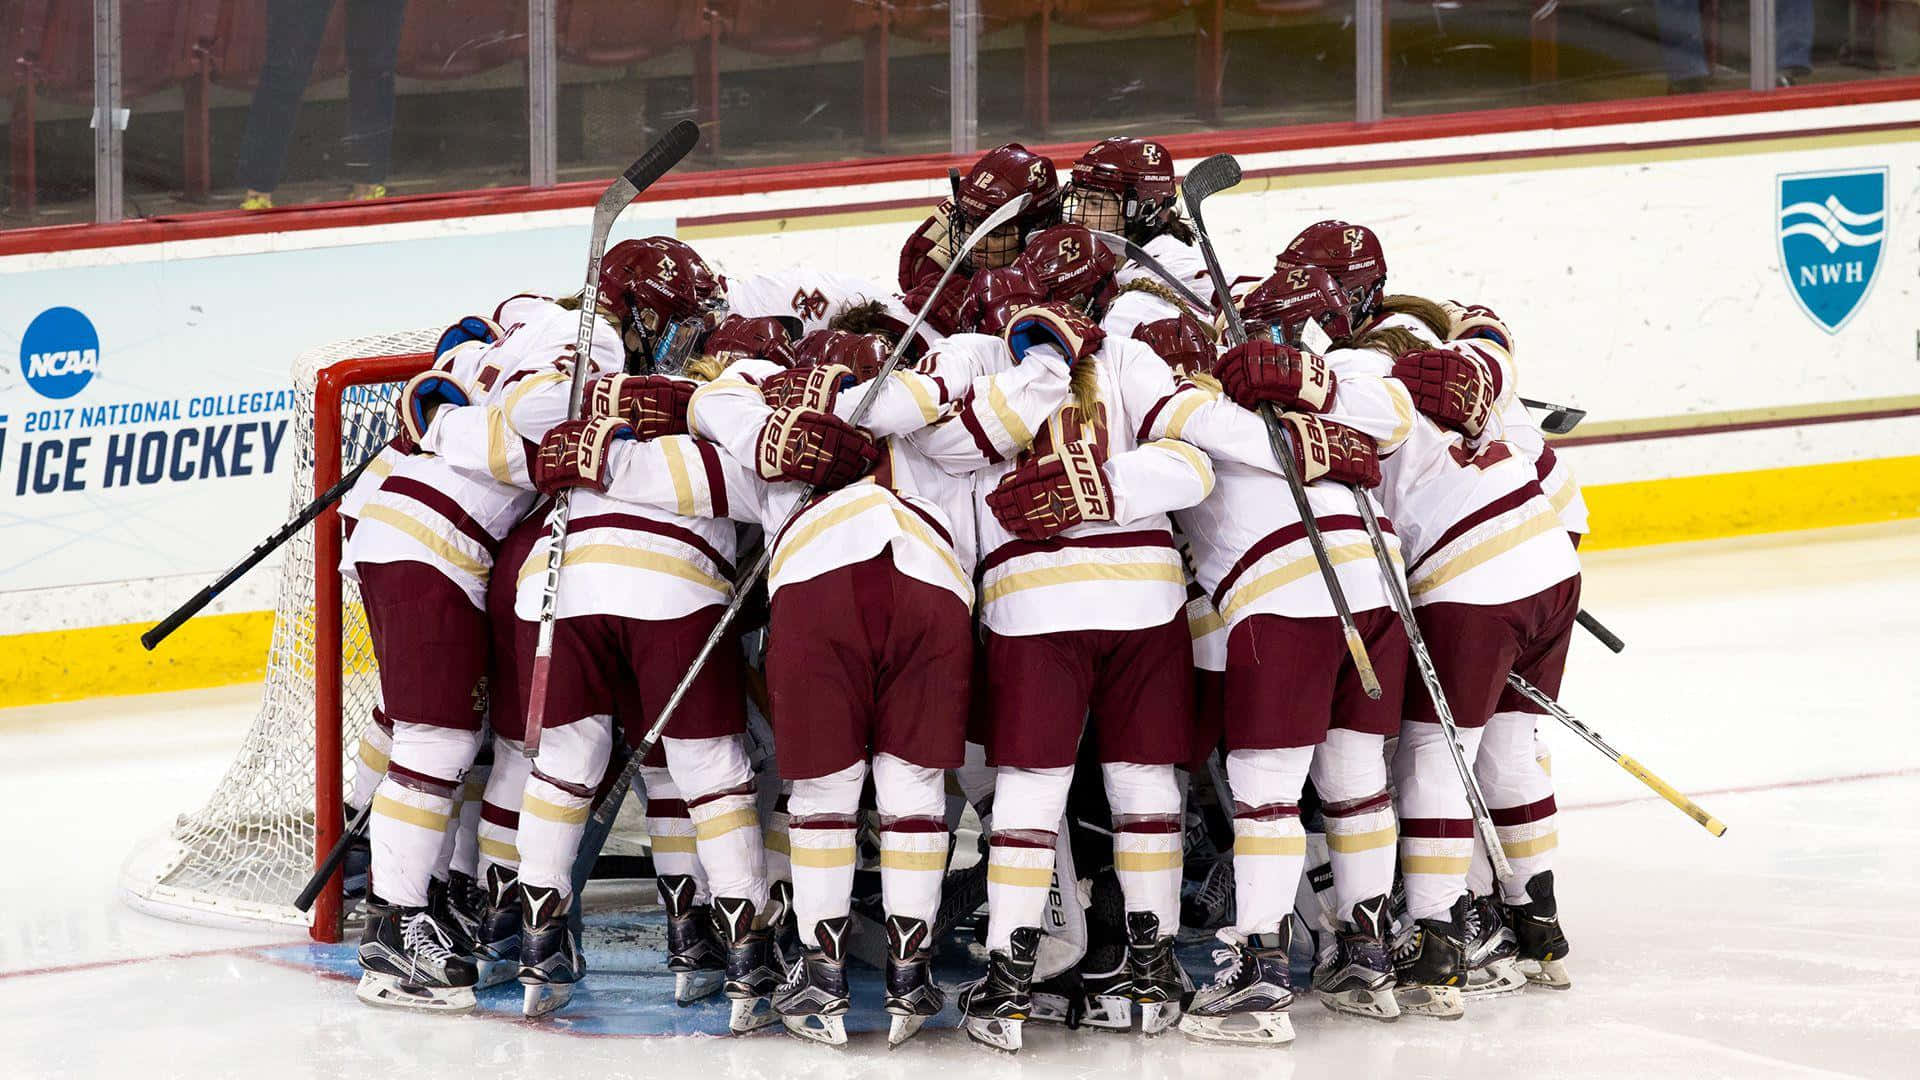 A Group Of Hockey Players Huddle Together On The Ice